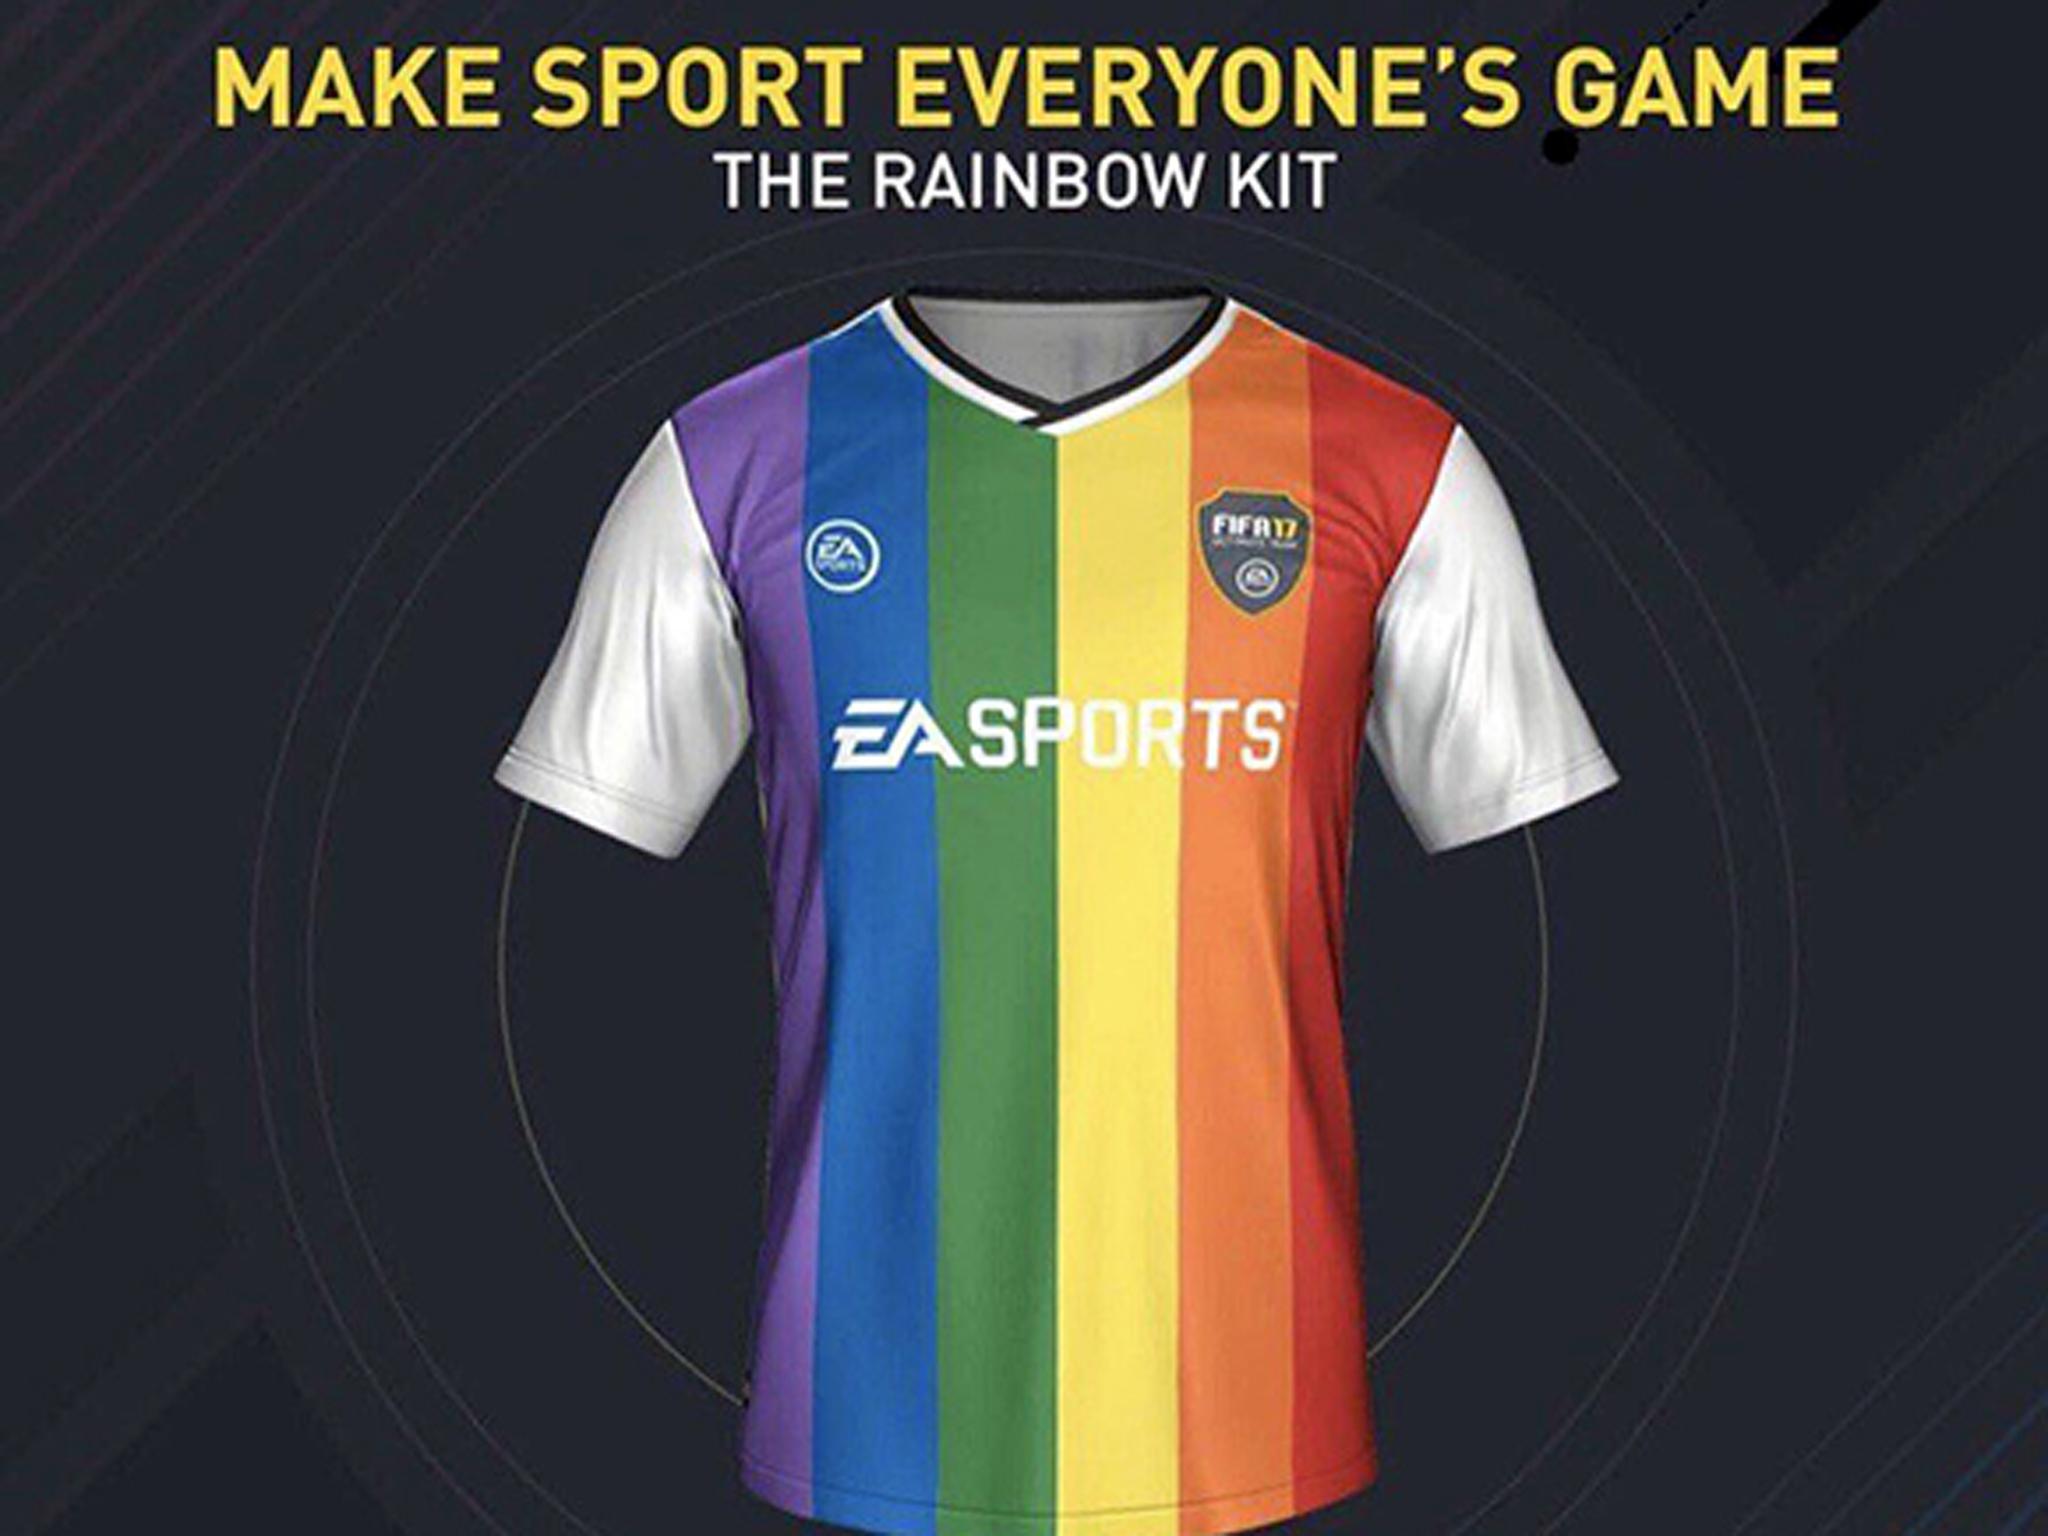 EA Sports gave FIFA 17 players the opportunity to choose a rainbow-coloured kit in support of LGBTI rights